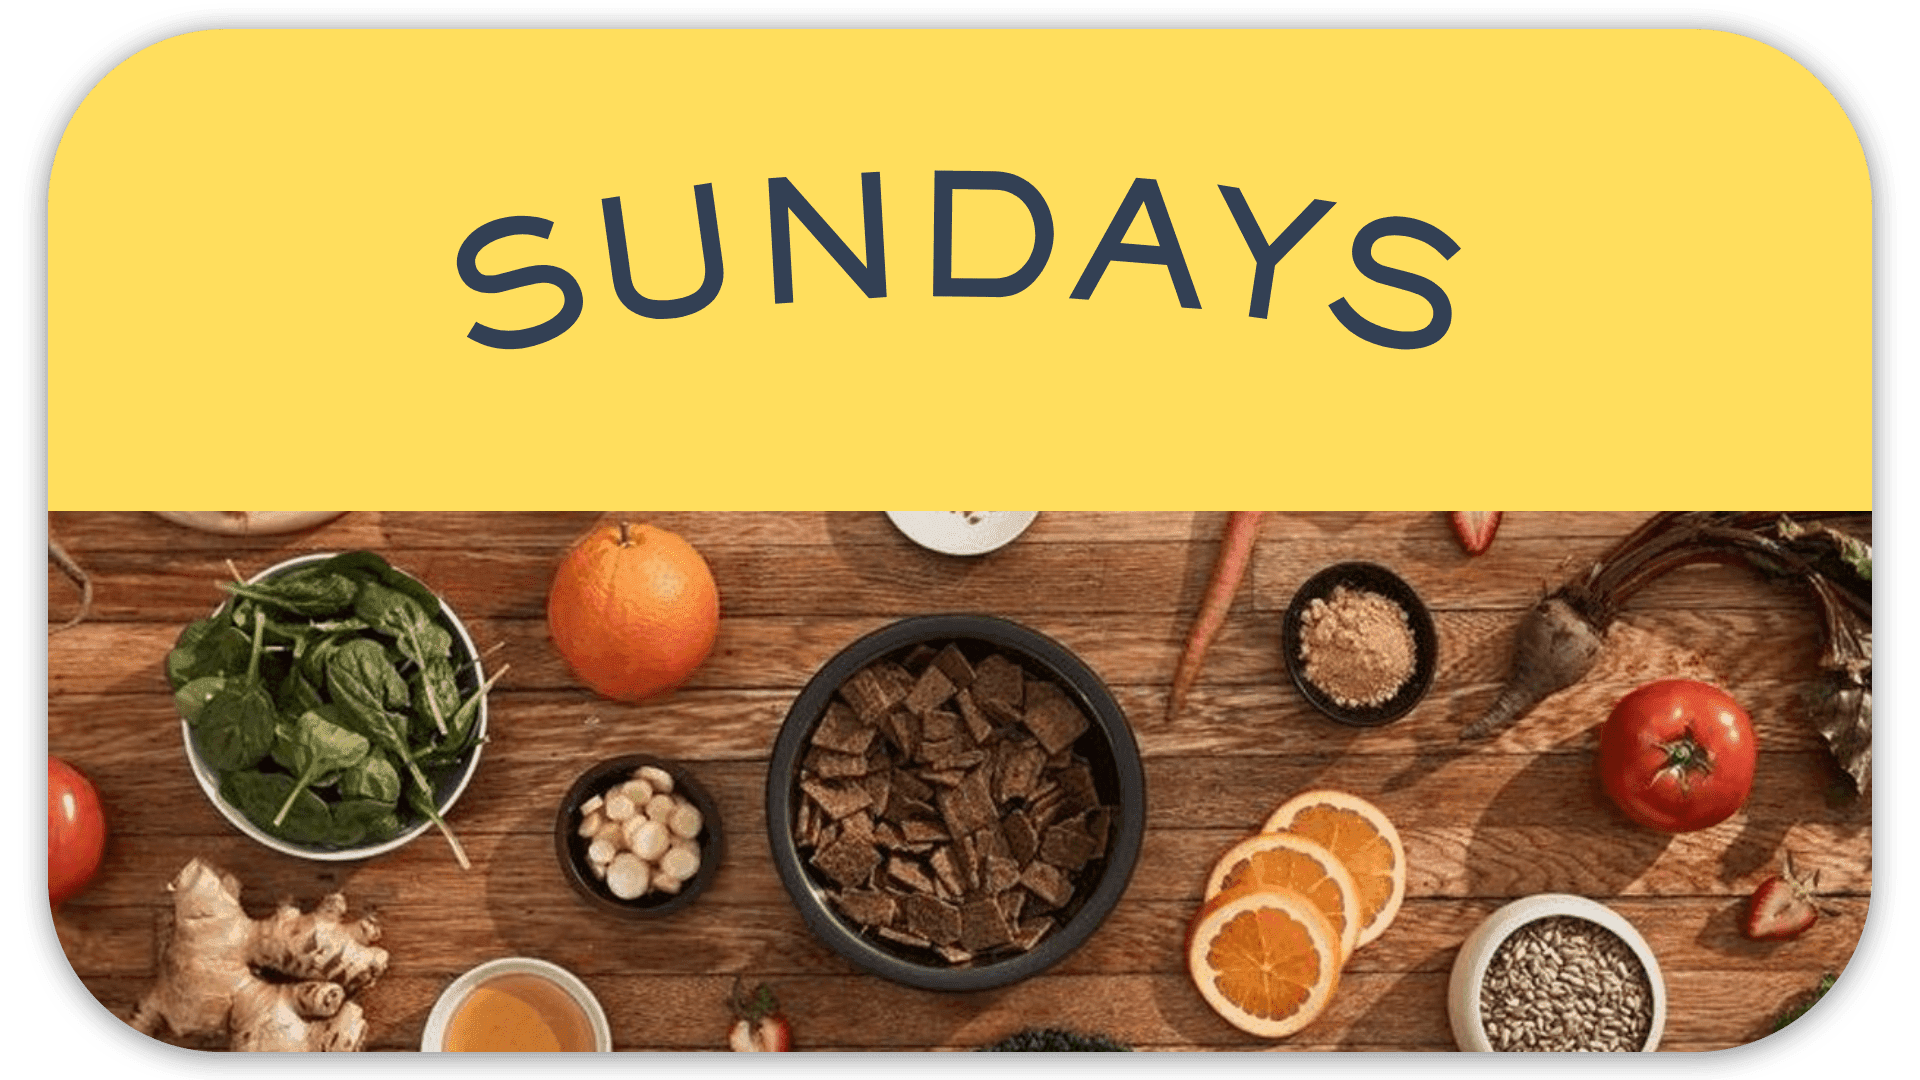 An assortment of food items on a wooden surface under a yellow banner reading "SUNDAYS".